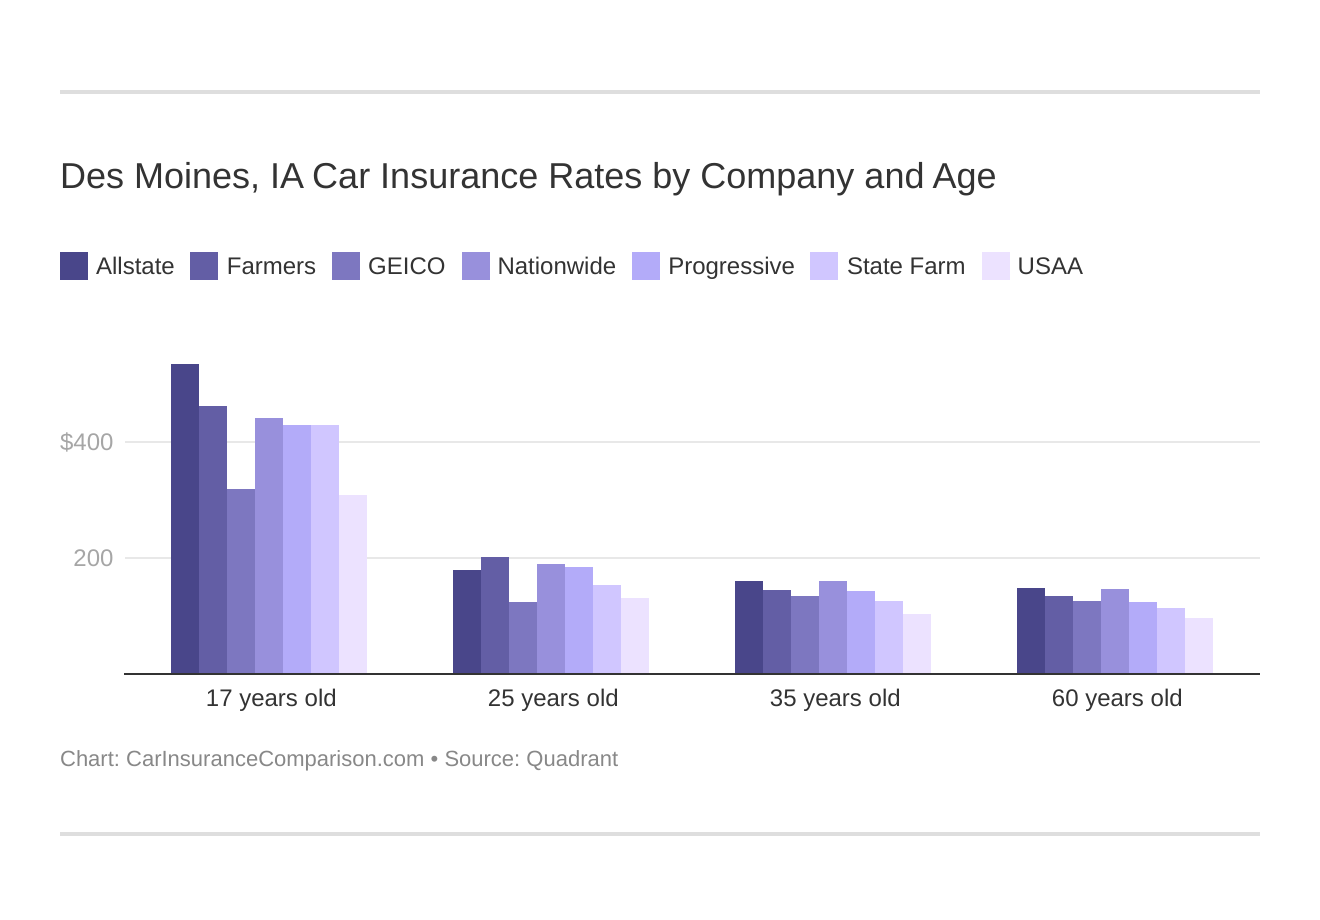 Des Moines, IA Car Insurance Rates by Company and Age